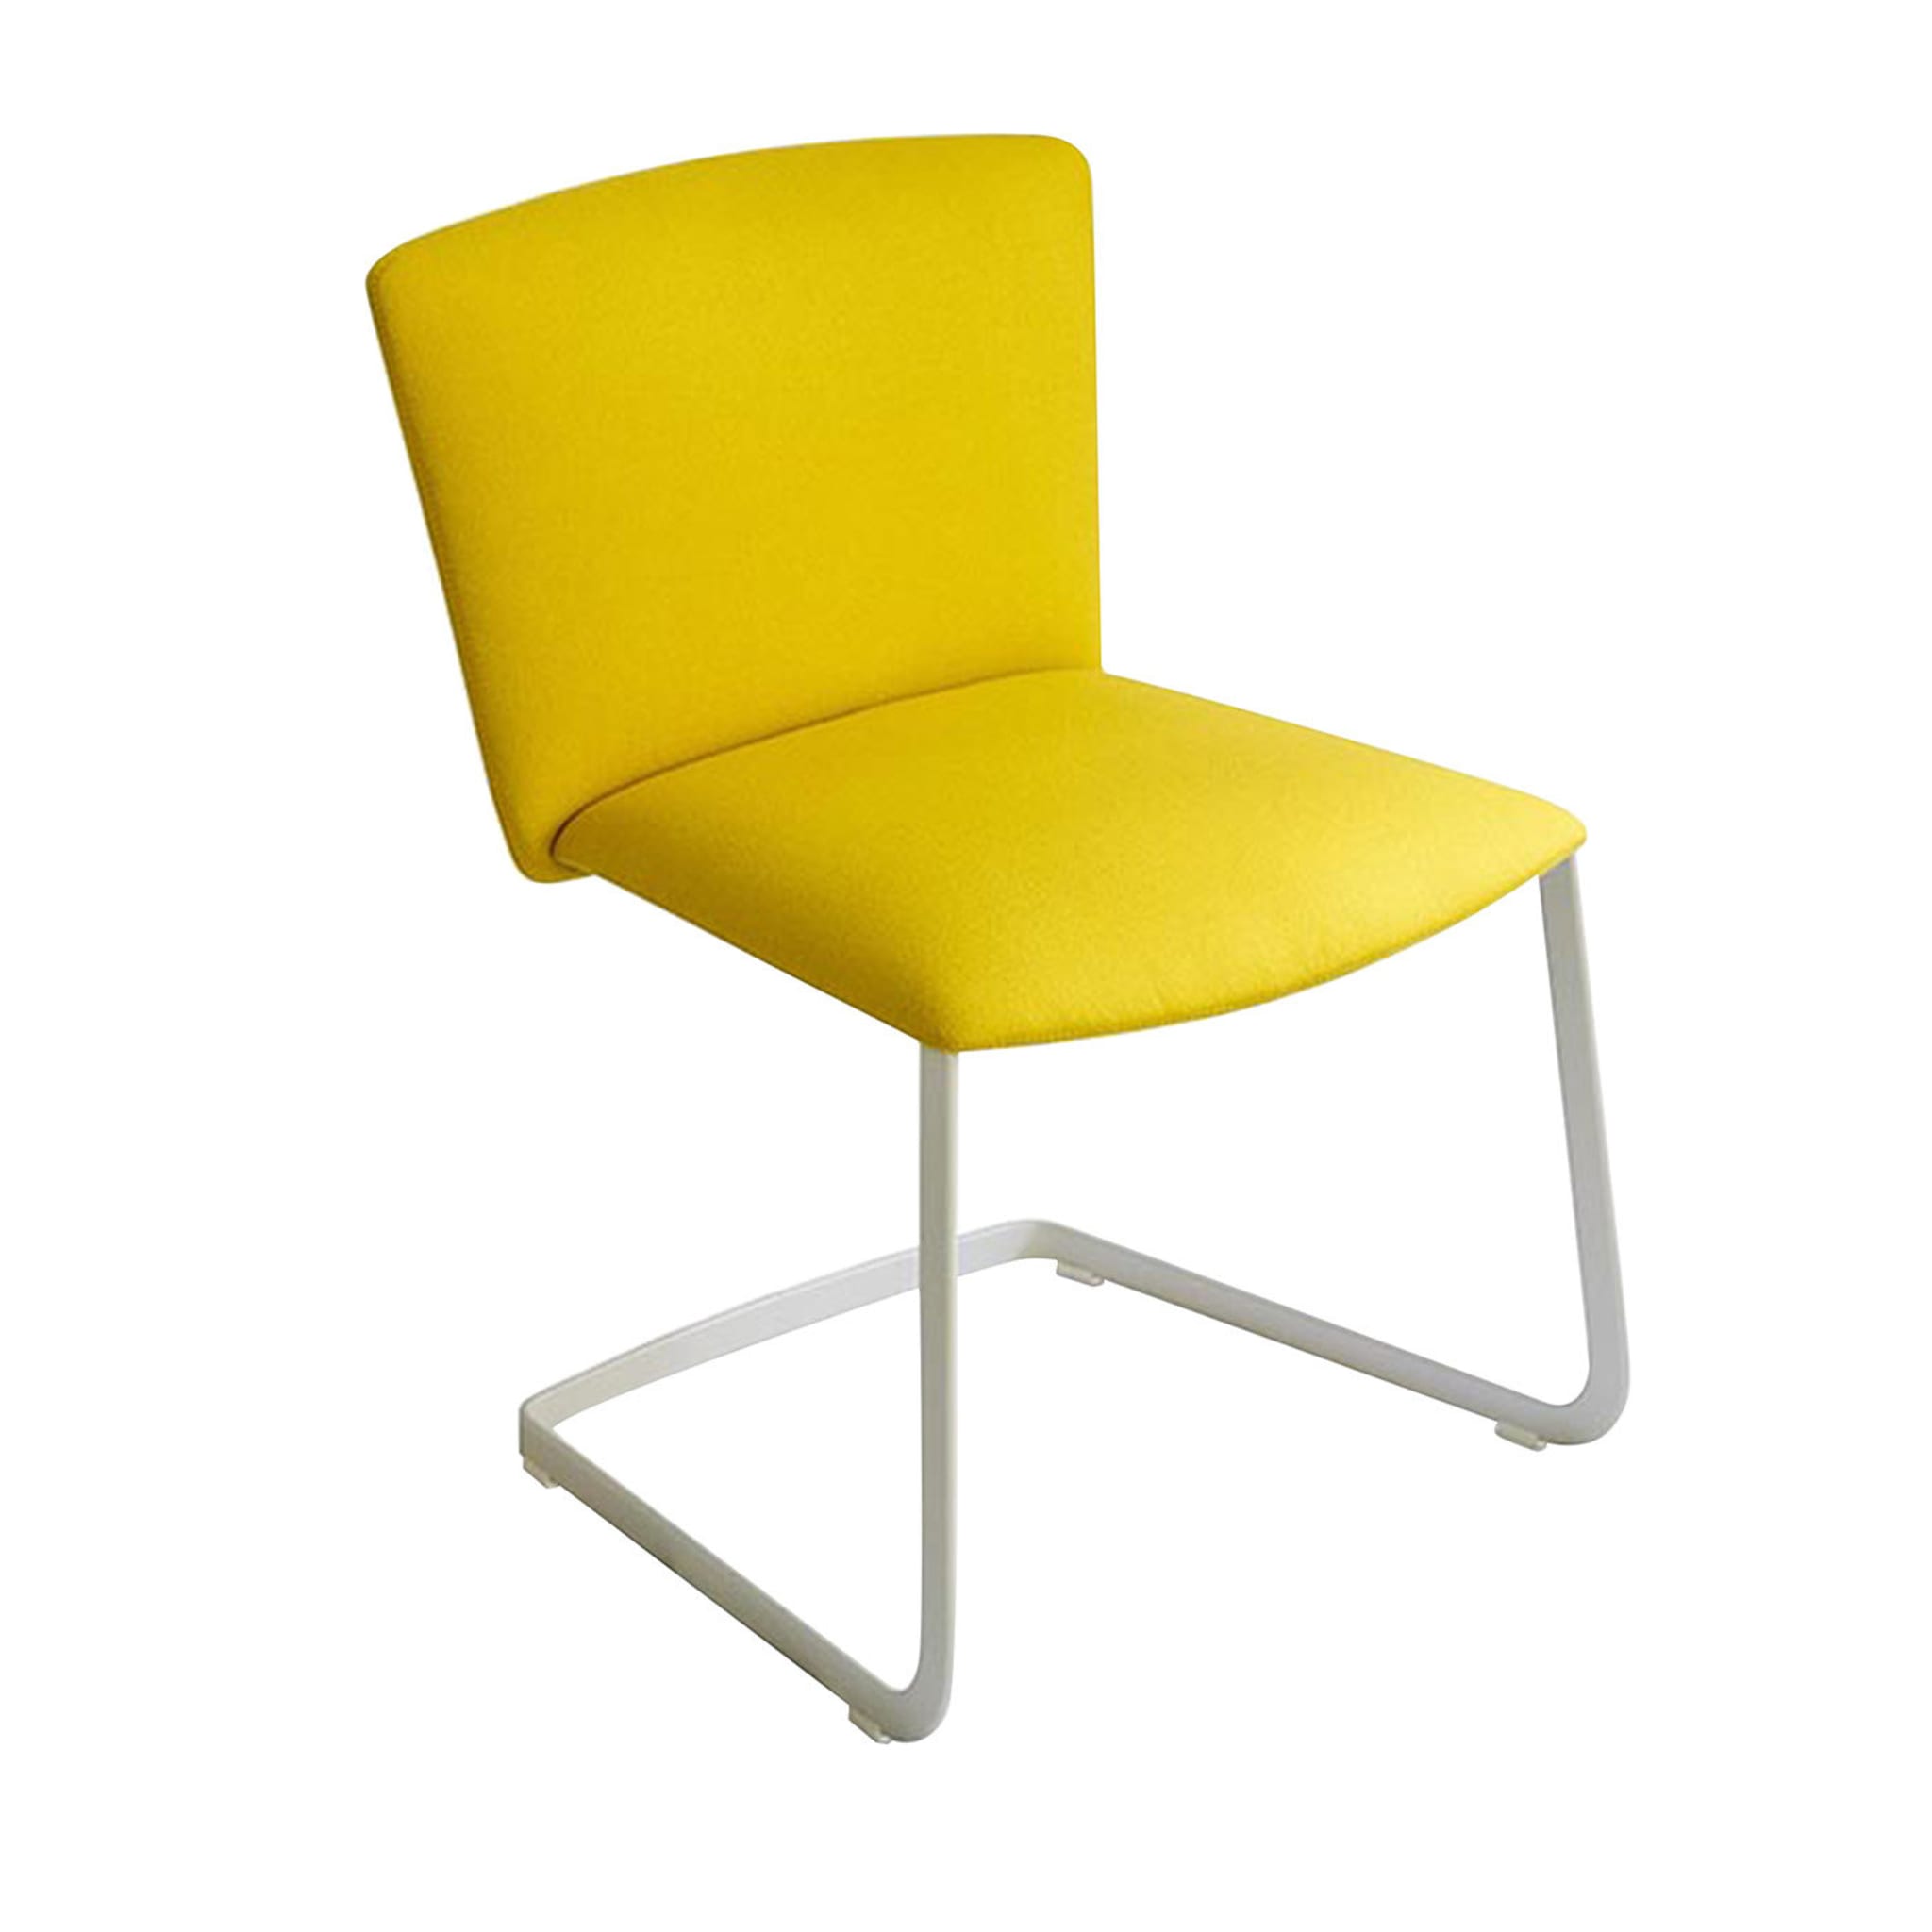 Vela Yellow Cantilever Chair by Lievore Altherr Molina - Main view